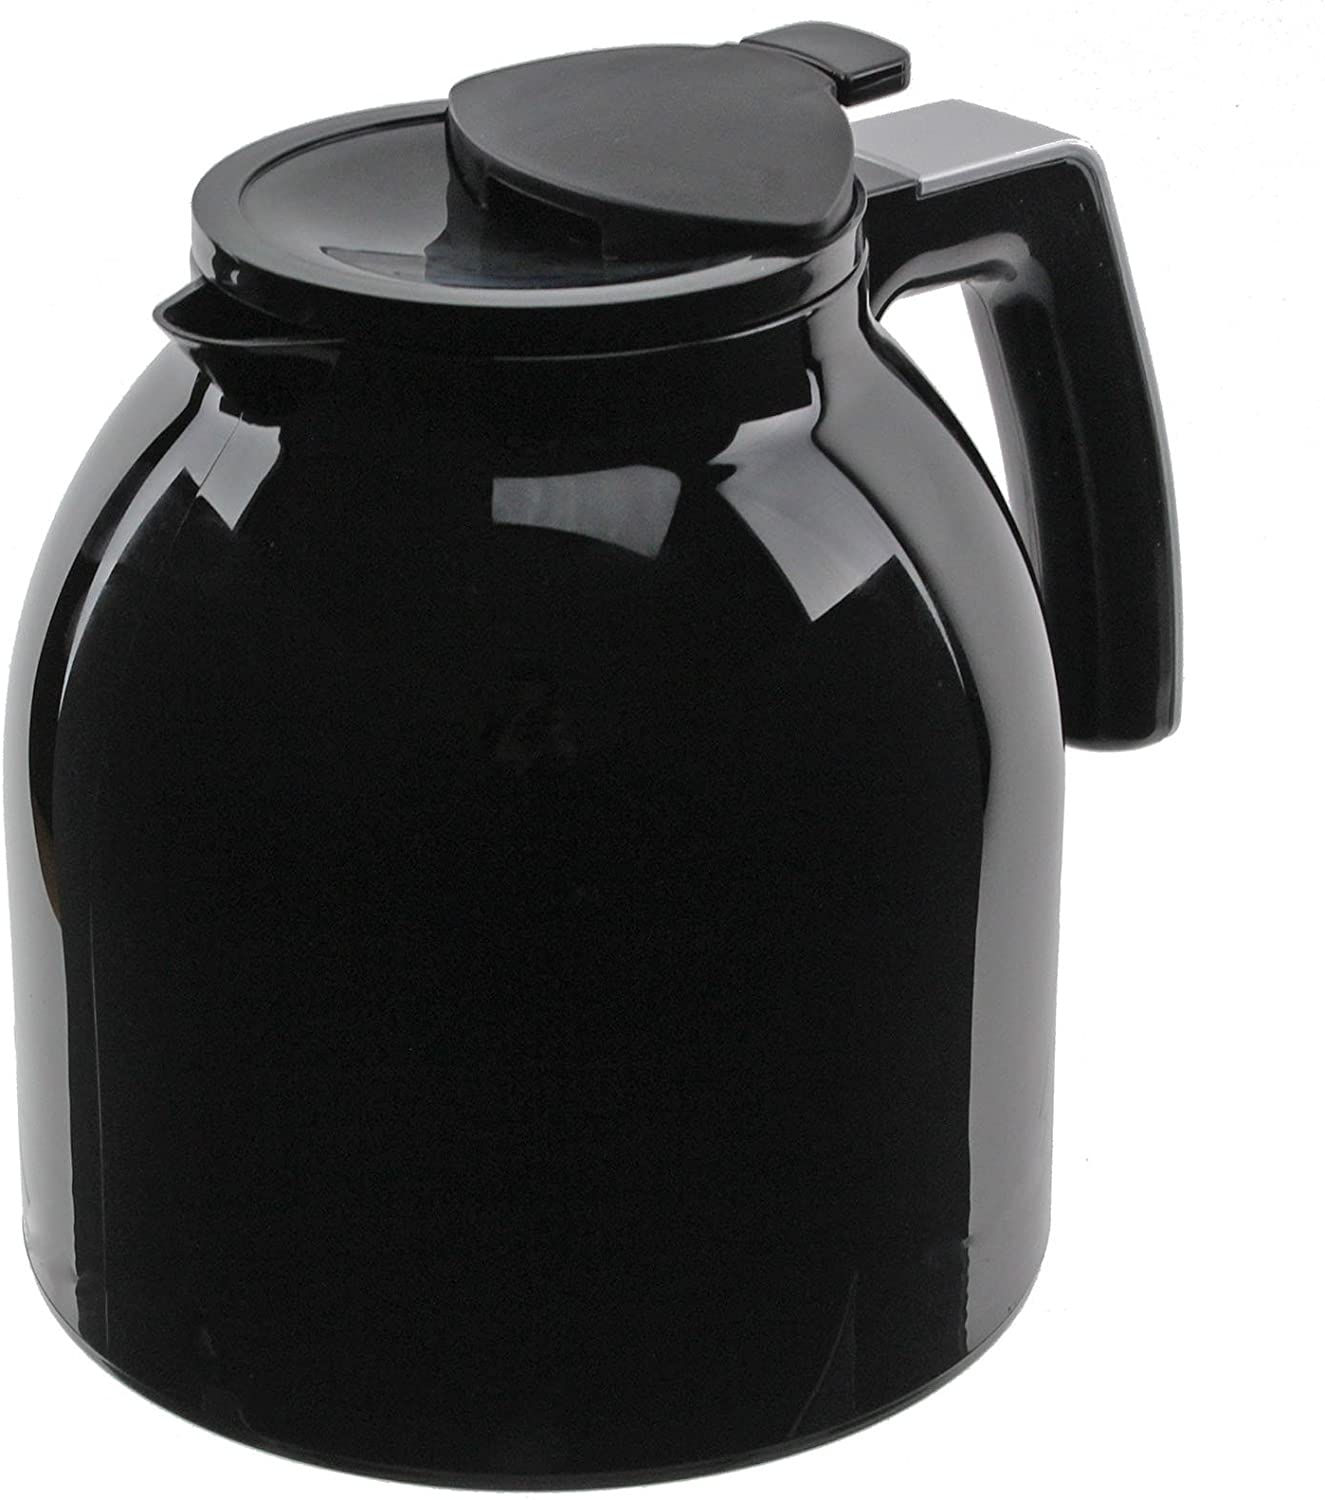 Melitta Look Therm Deluxe Thermal Coffee Machine Filter Jug (Black) by Melitta